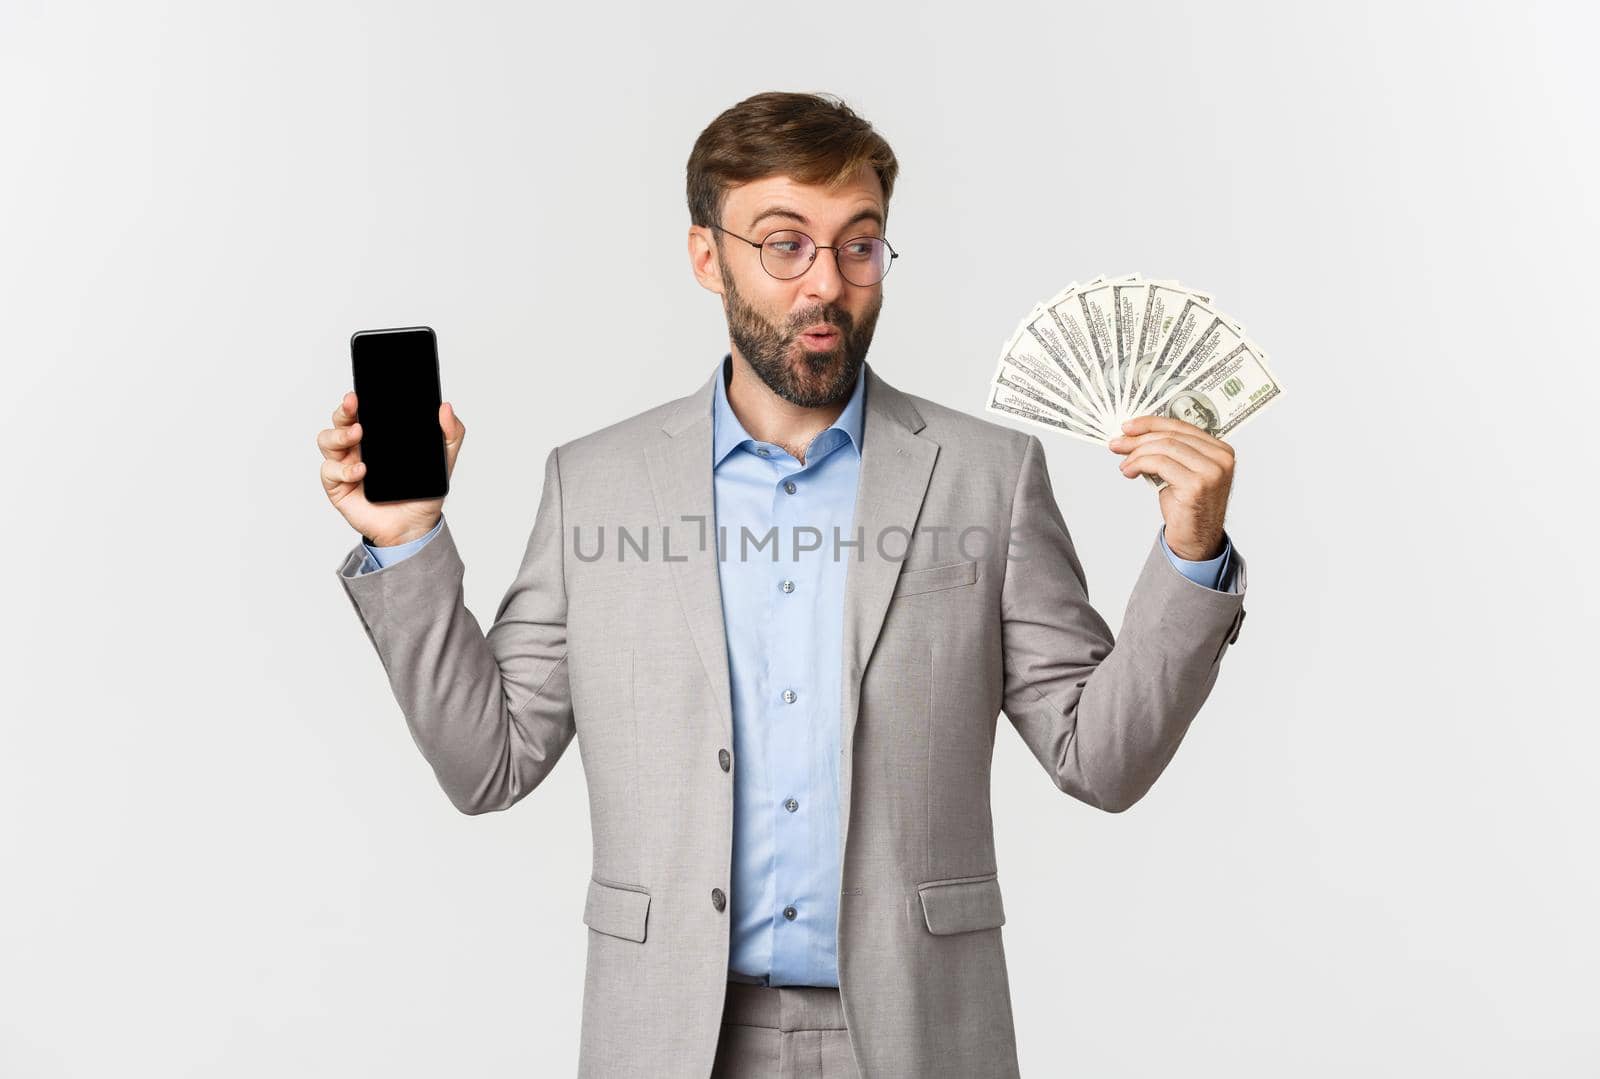 Handsome male boss in grey suit and glasses, smiling pleased as looking at money, showing mobile phone screen, standing over white background.